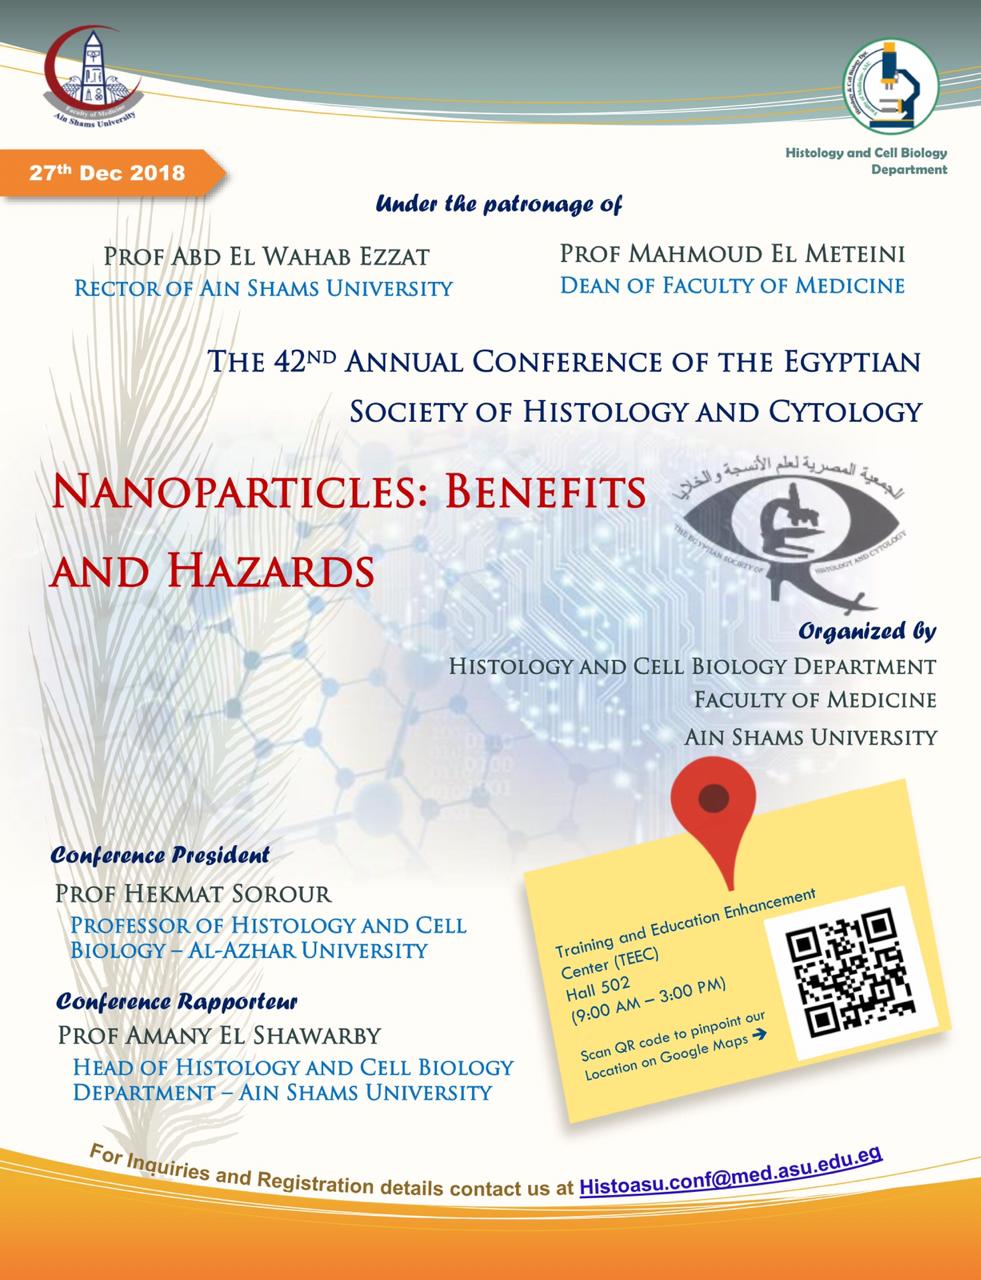 The 42nd Conference of the Egyptian Society of Tissue and Cell Science entitled "Nanoparticles ... Advantages and disadvantages